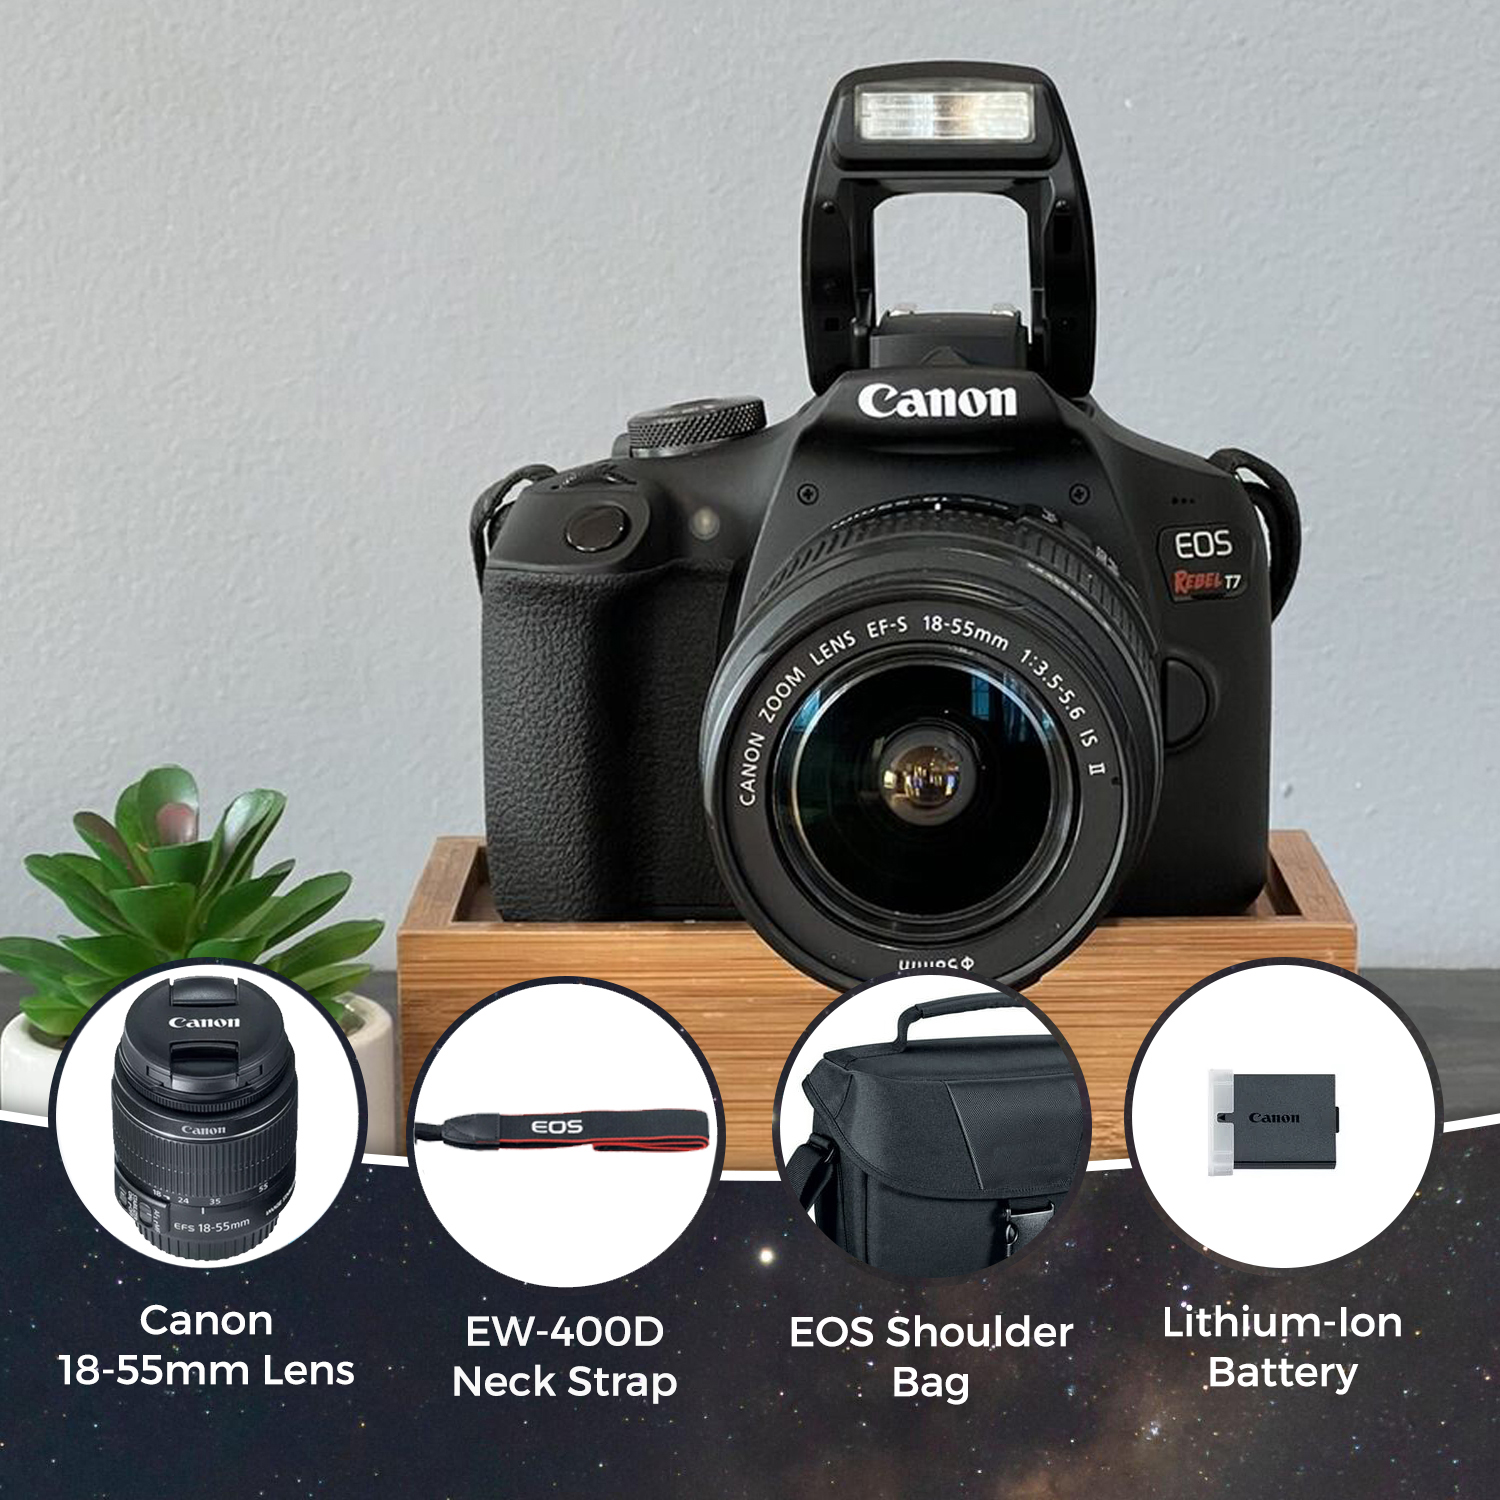 Canon EOS Rebel T7 DSLR Camera with 18-55mm Lens, Wi-Fi and Accessories: Bag, 64GB Card and More (New) - image 3 of 6